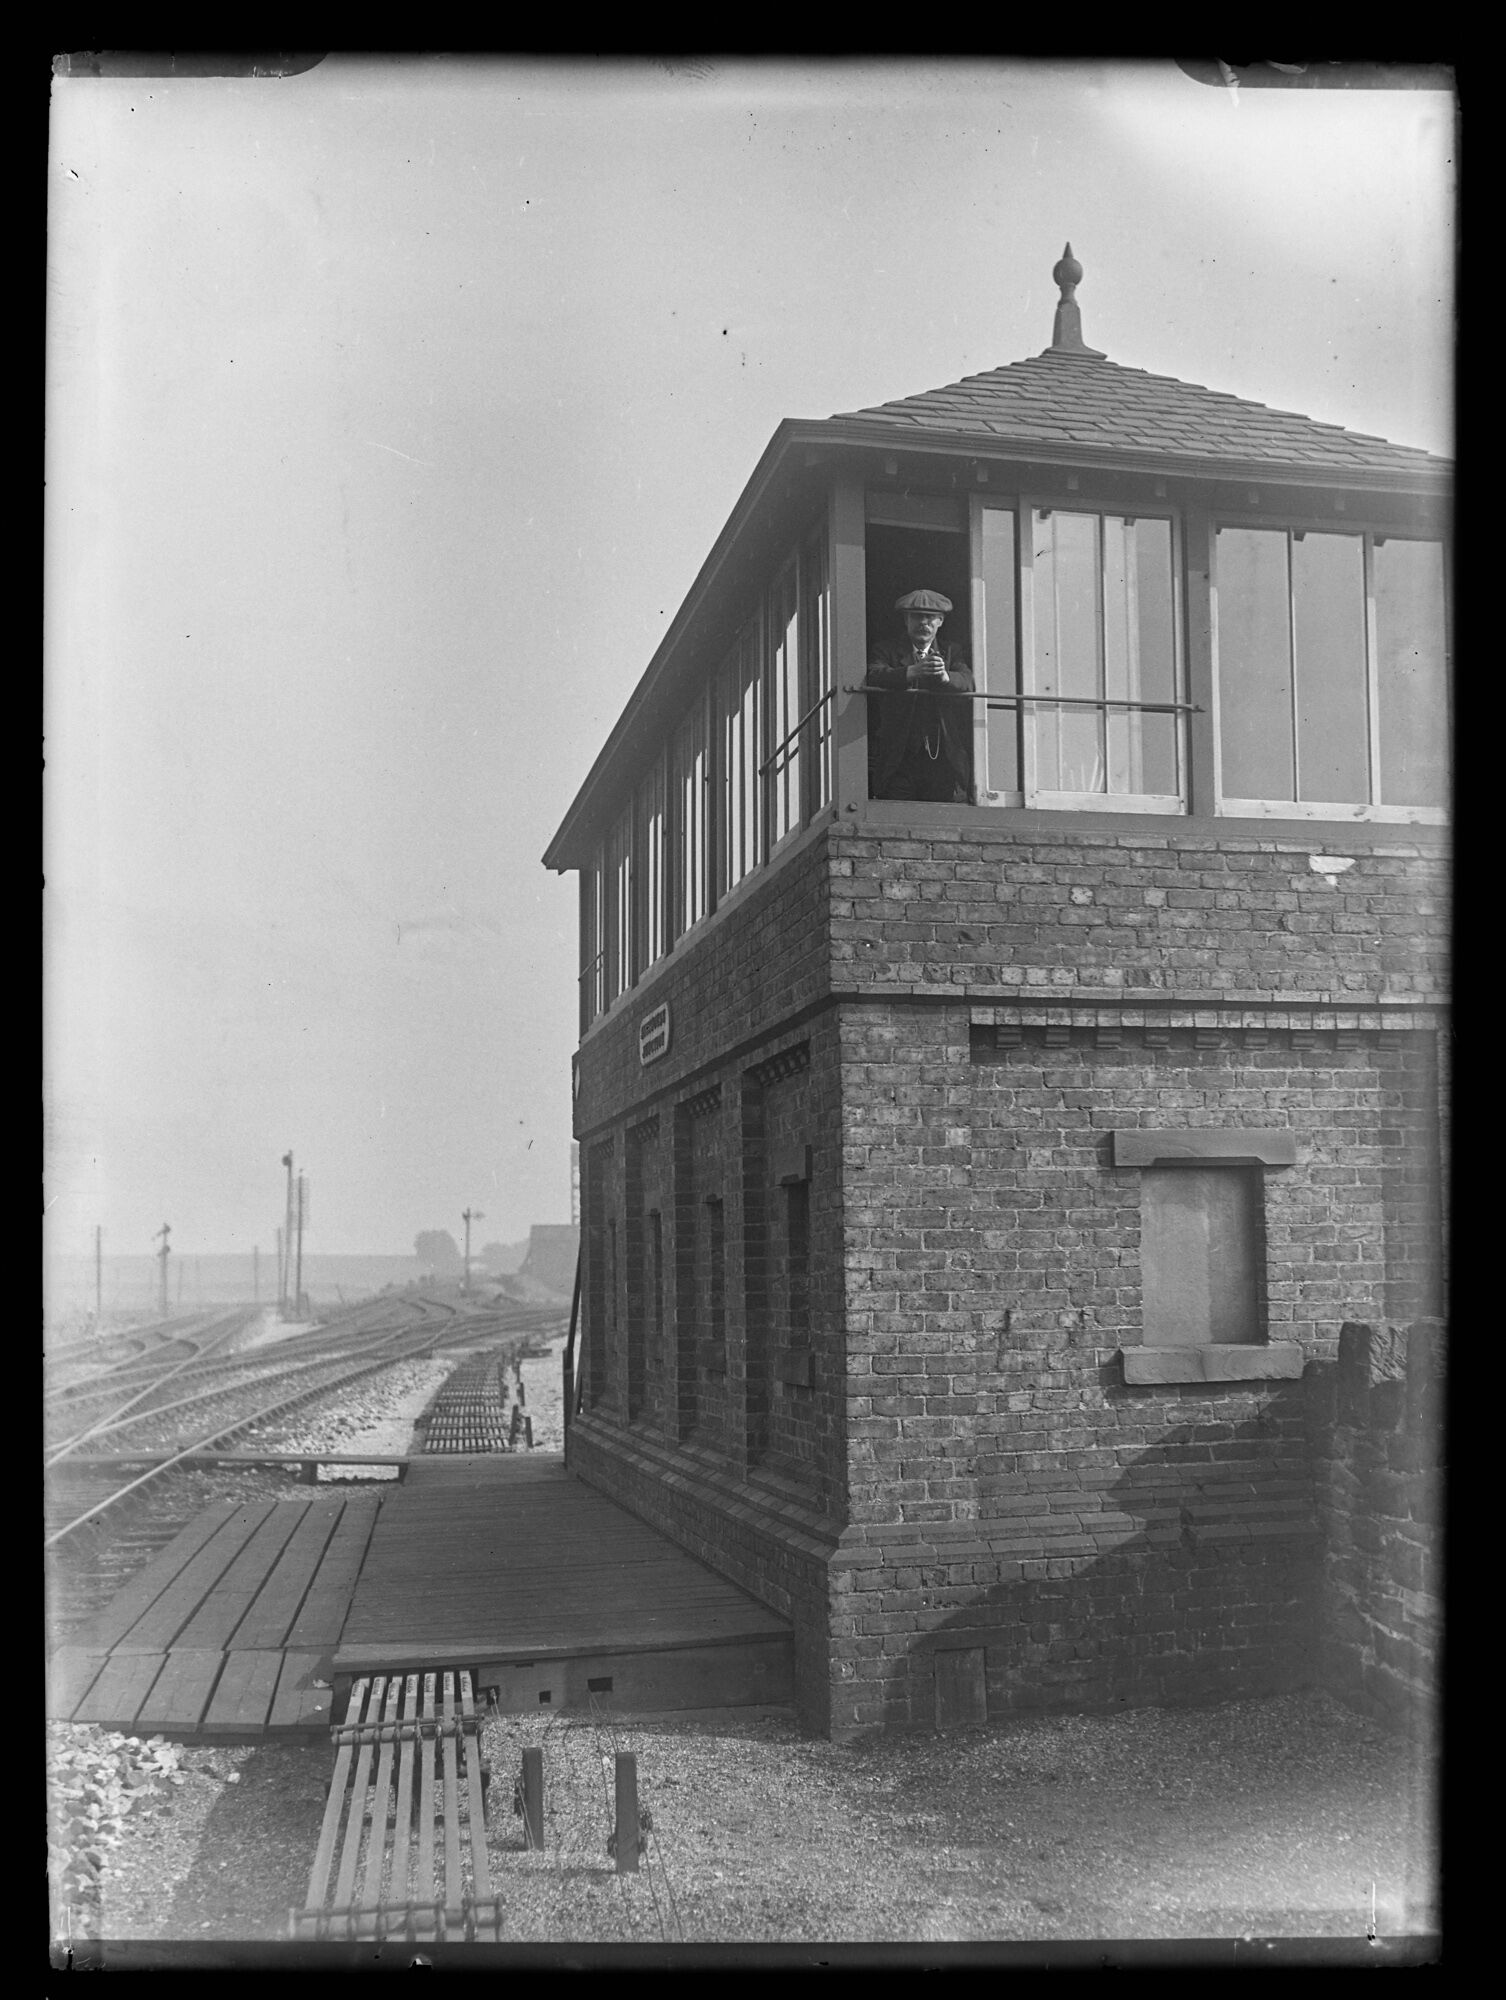 Salthouse Junction Box, Barrow-in-Furness